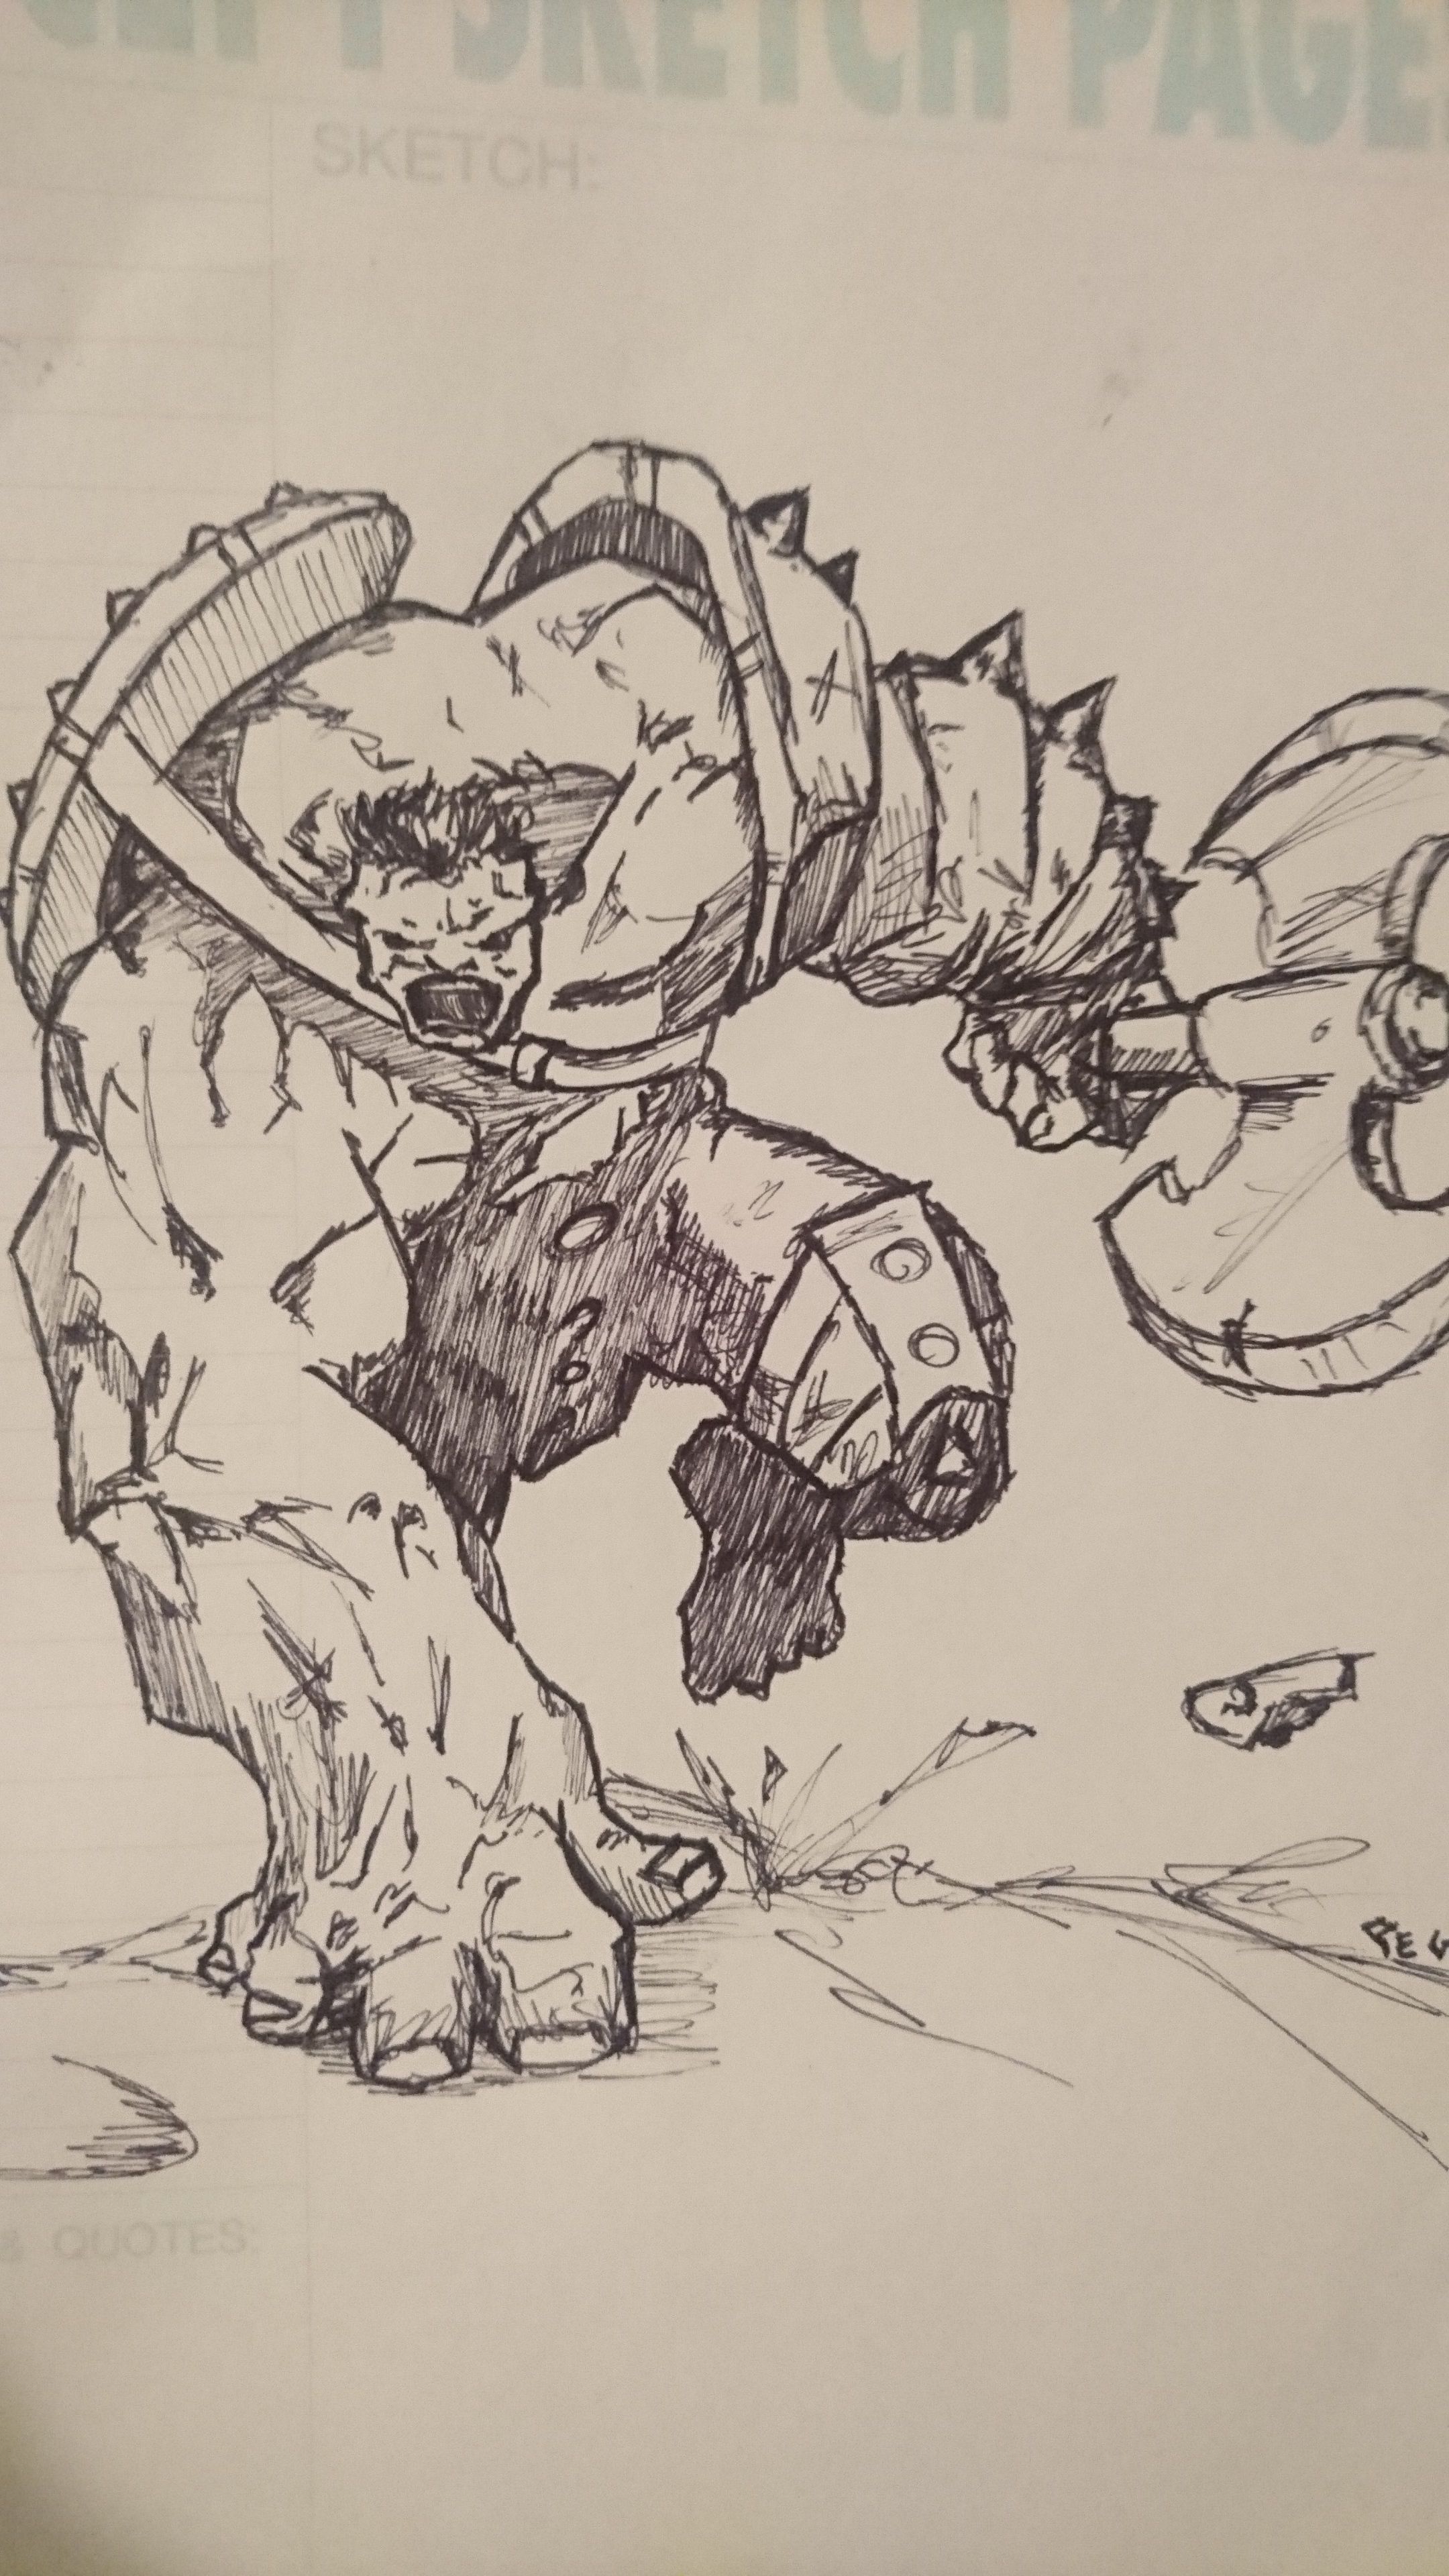 The Hulk' White Pen drawing on - Planet_of_creations